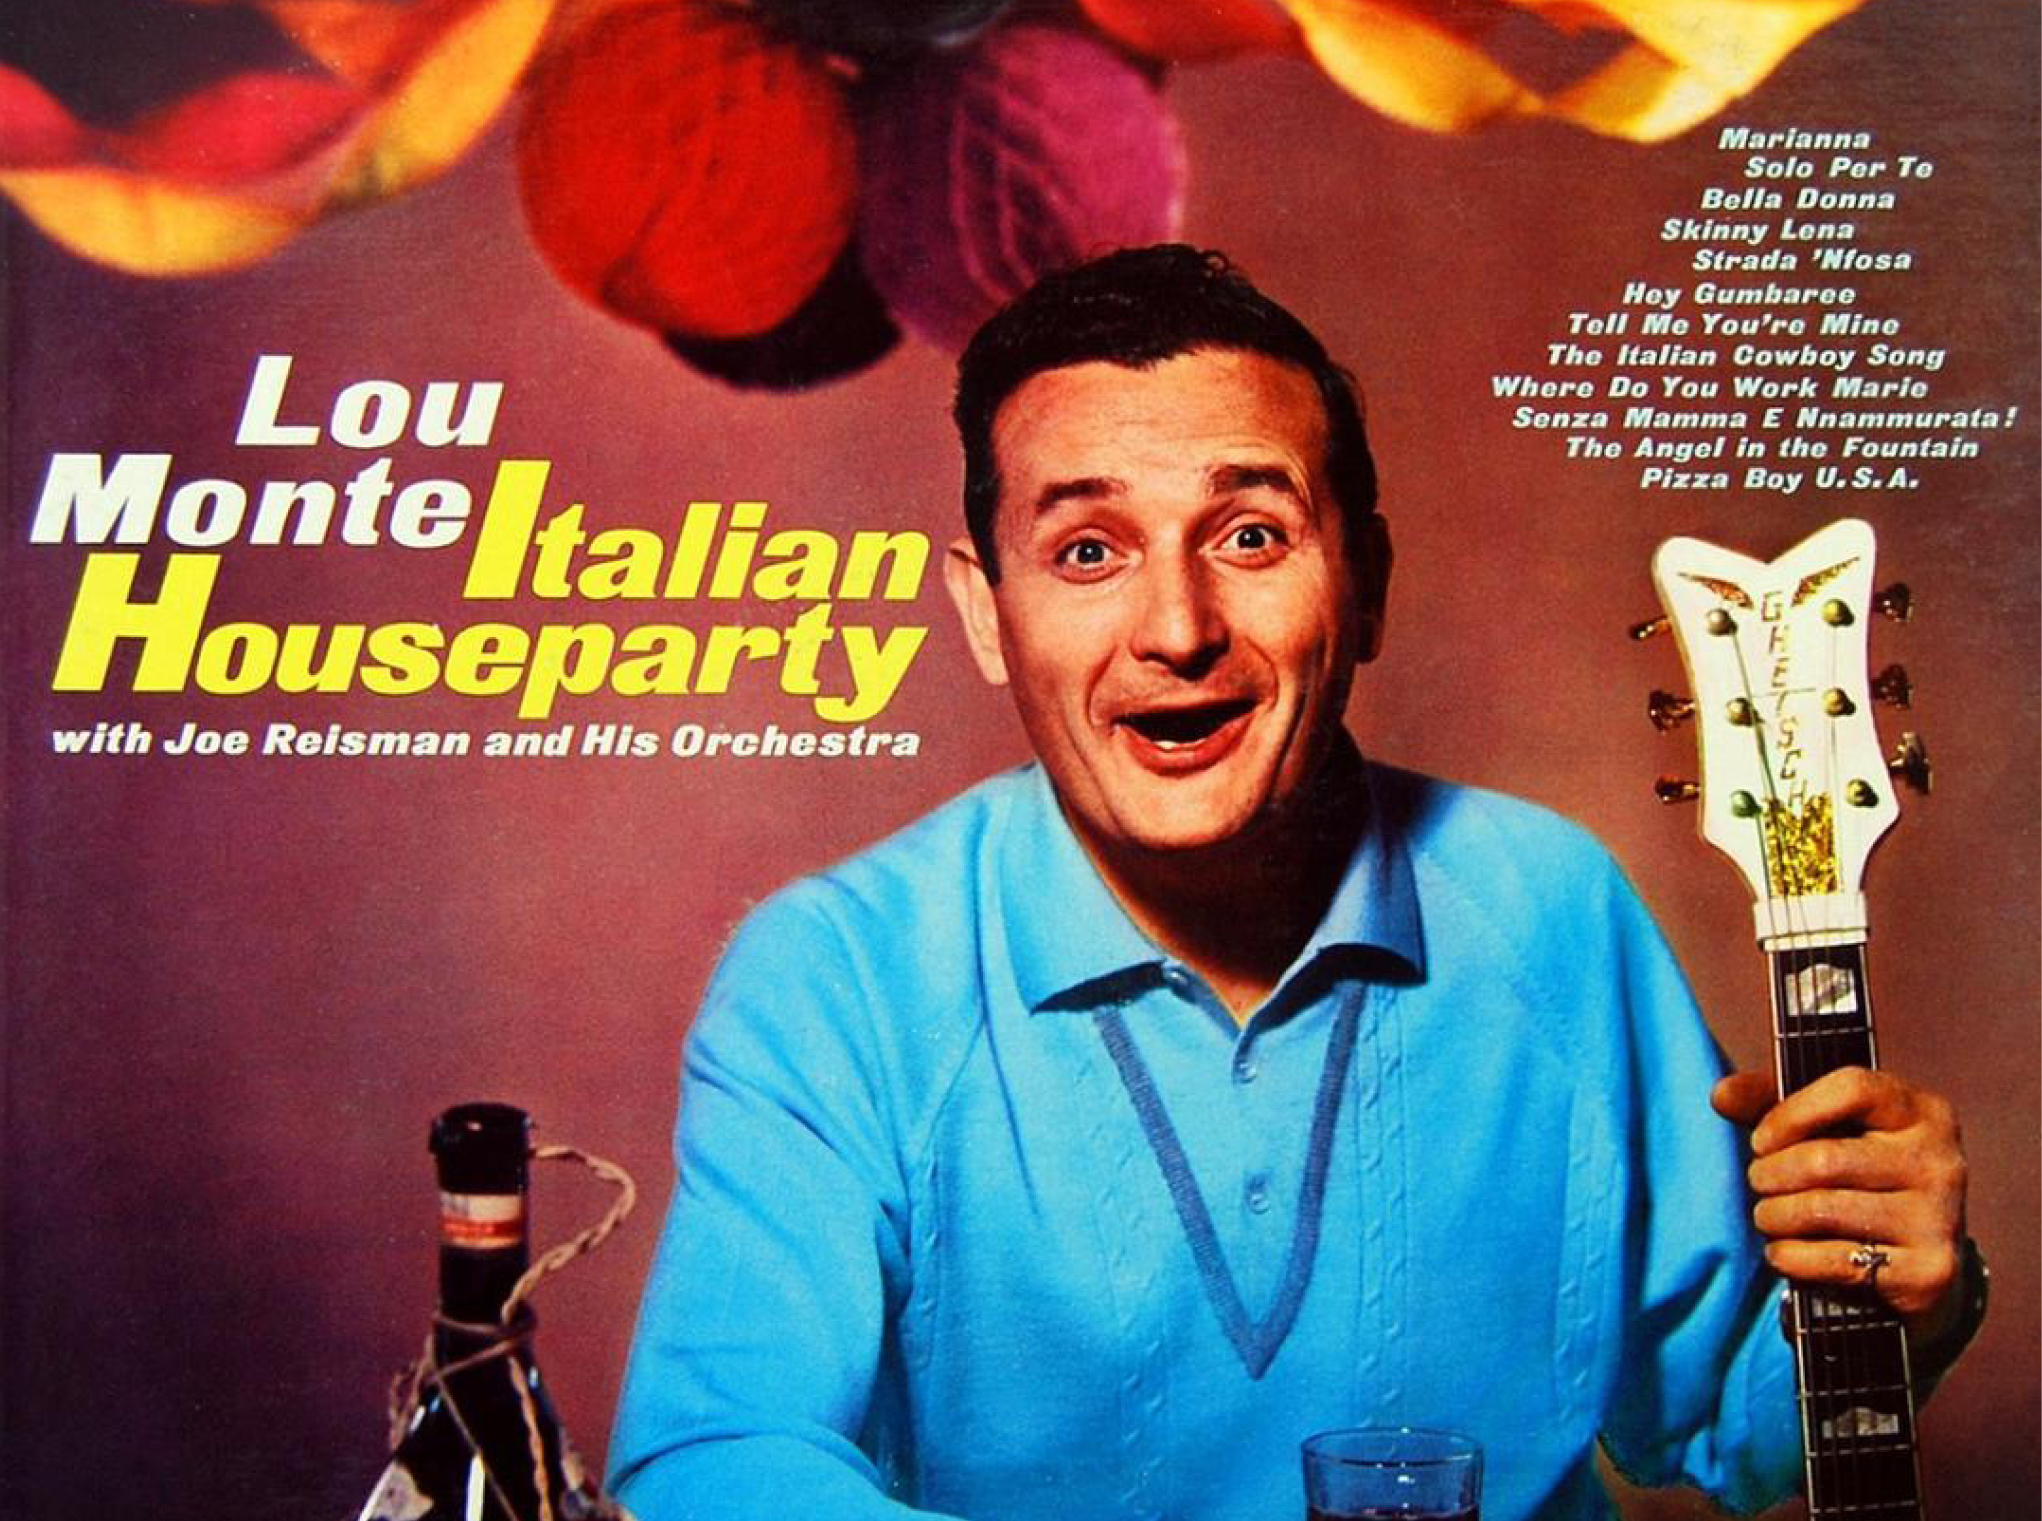 Funny Italian Songs from the 1950s to 1970s to Play at Your Pizza Party